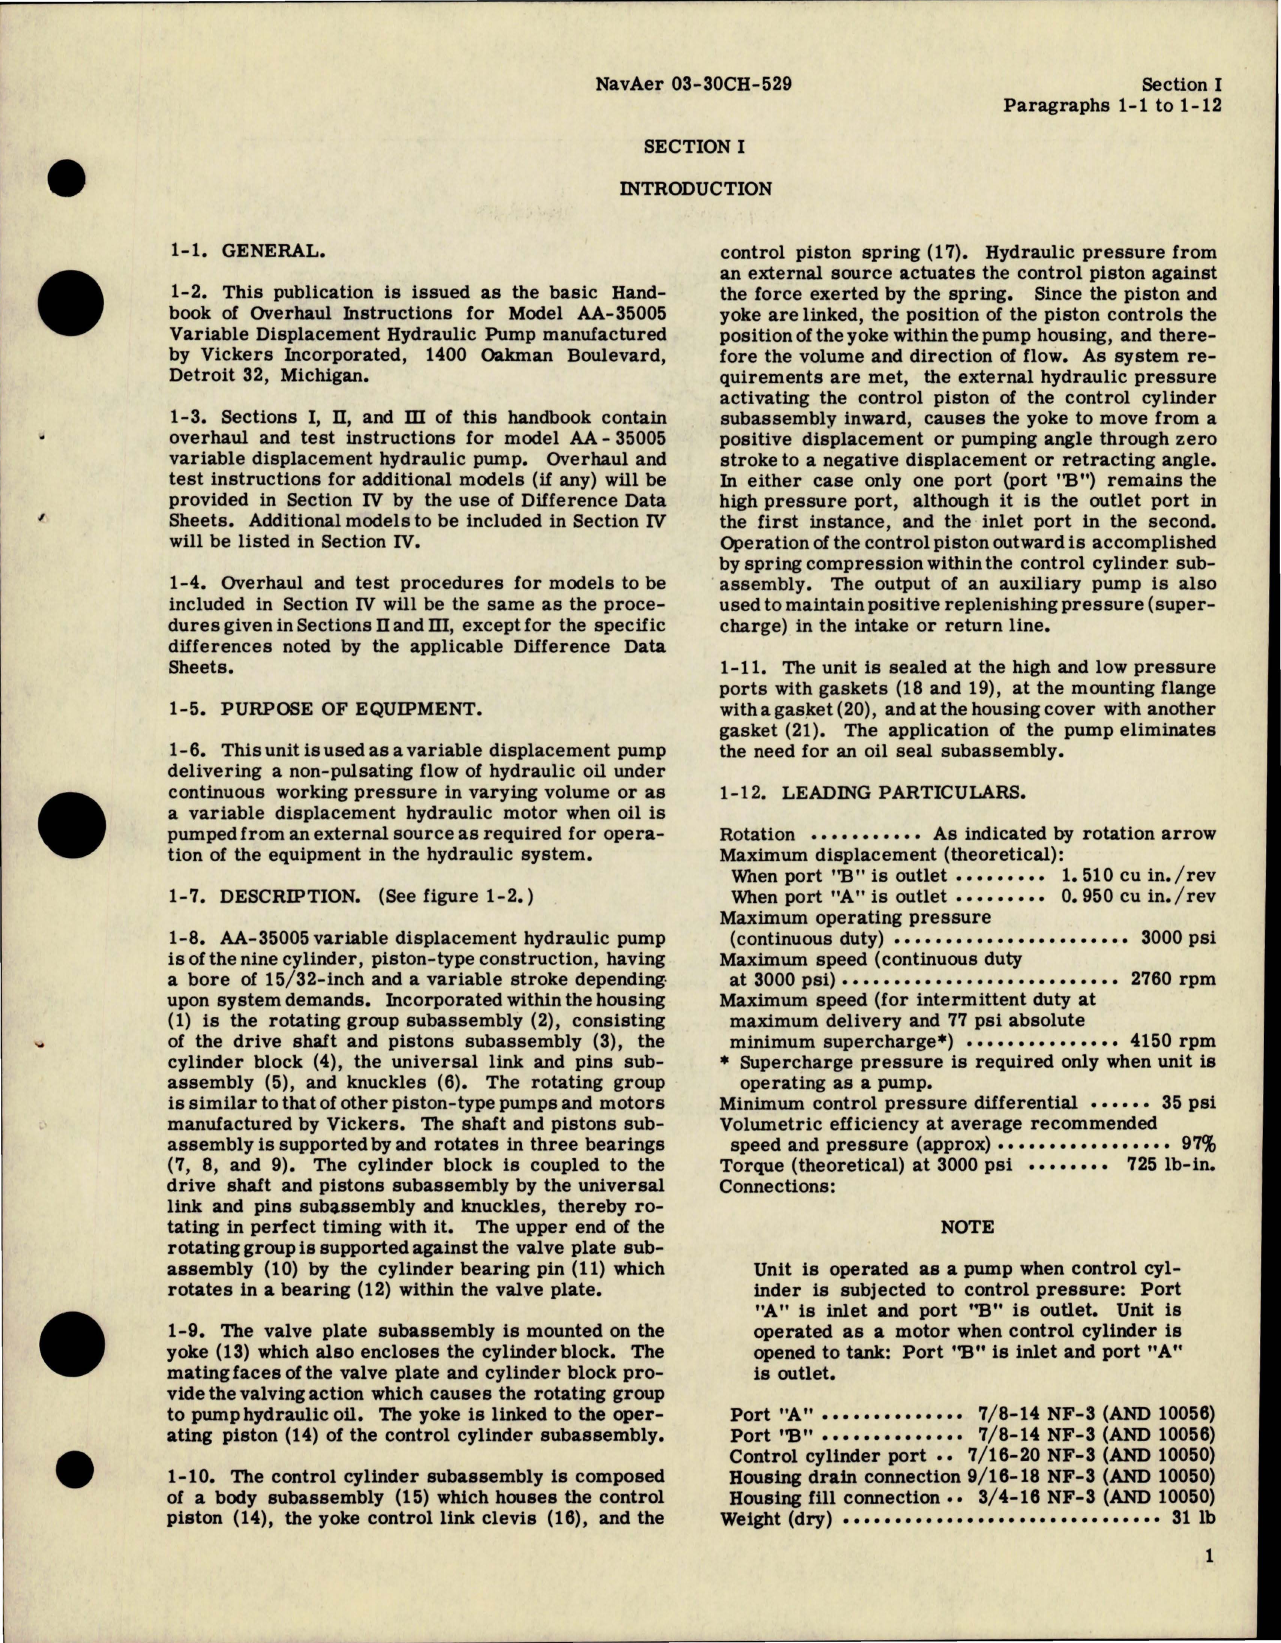 Sample page 5 from AirCorps Library document: Overhaul Instructions for Variable Displacement Hydraulic Pump - Model AA-35005 